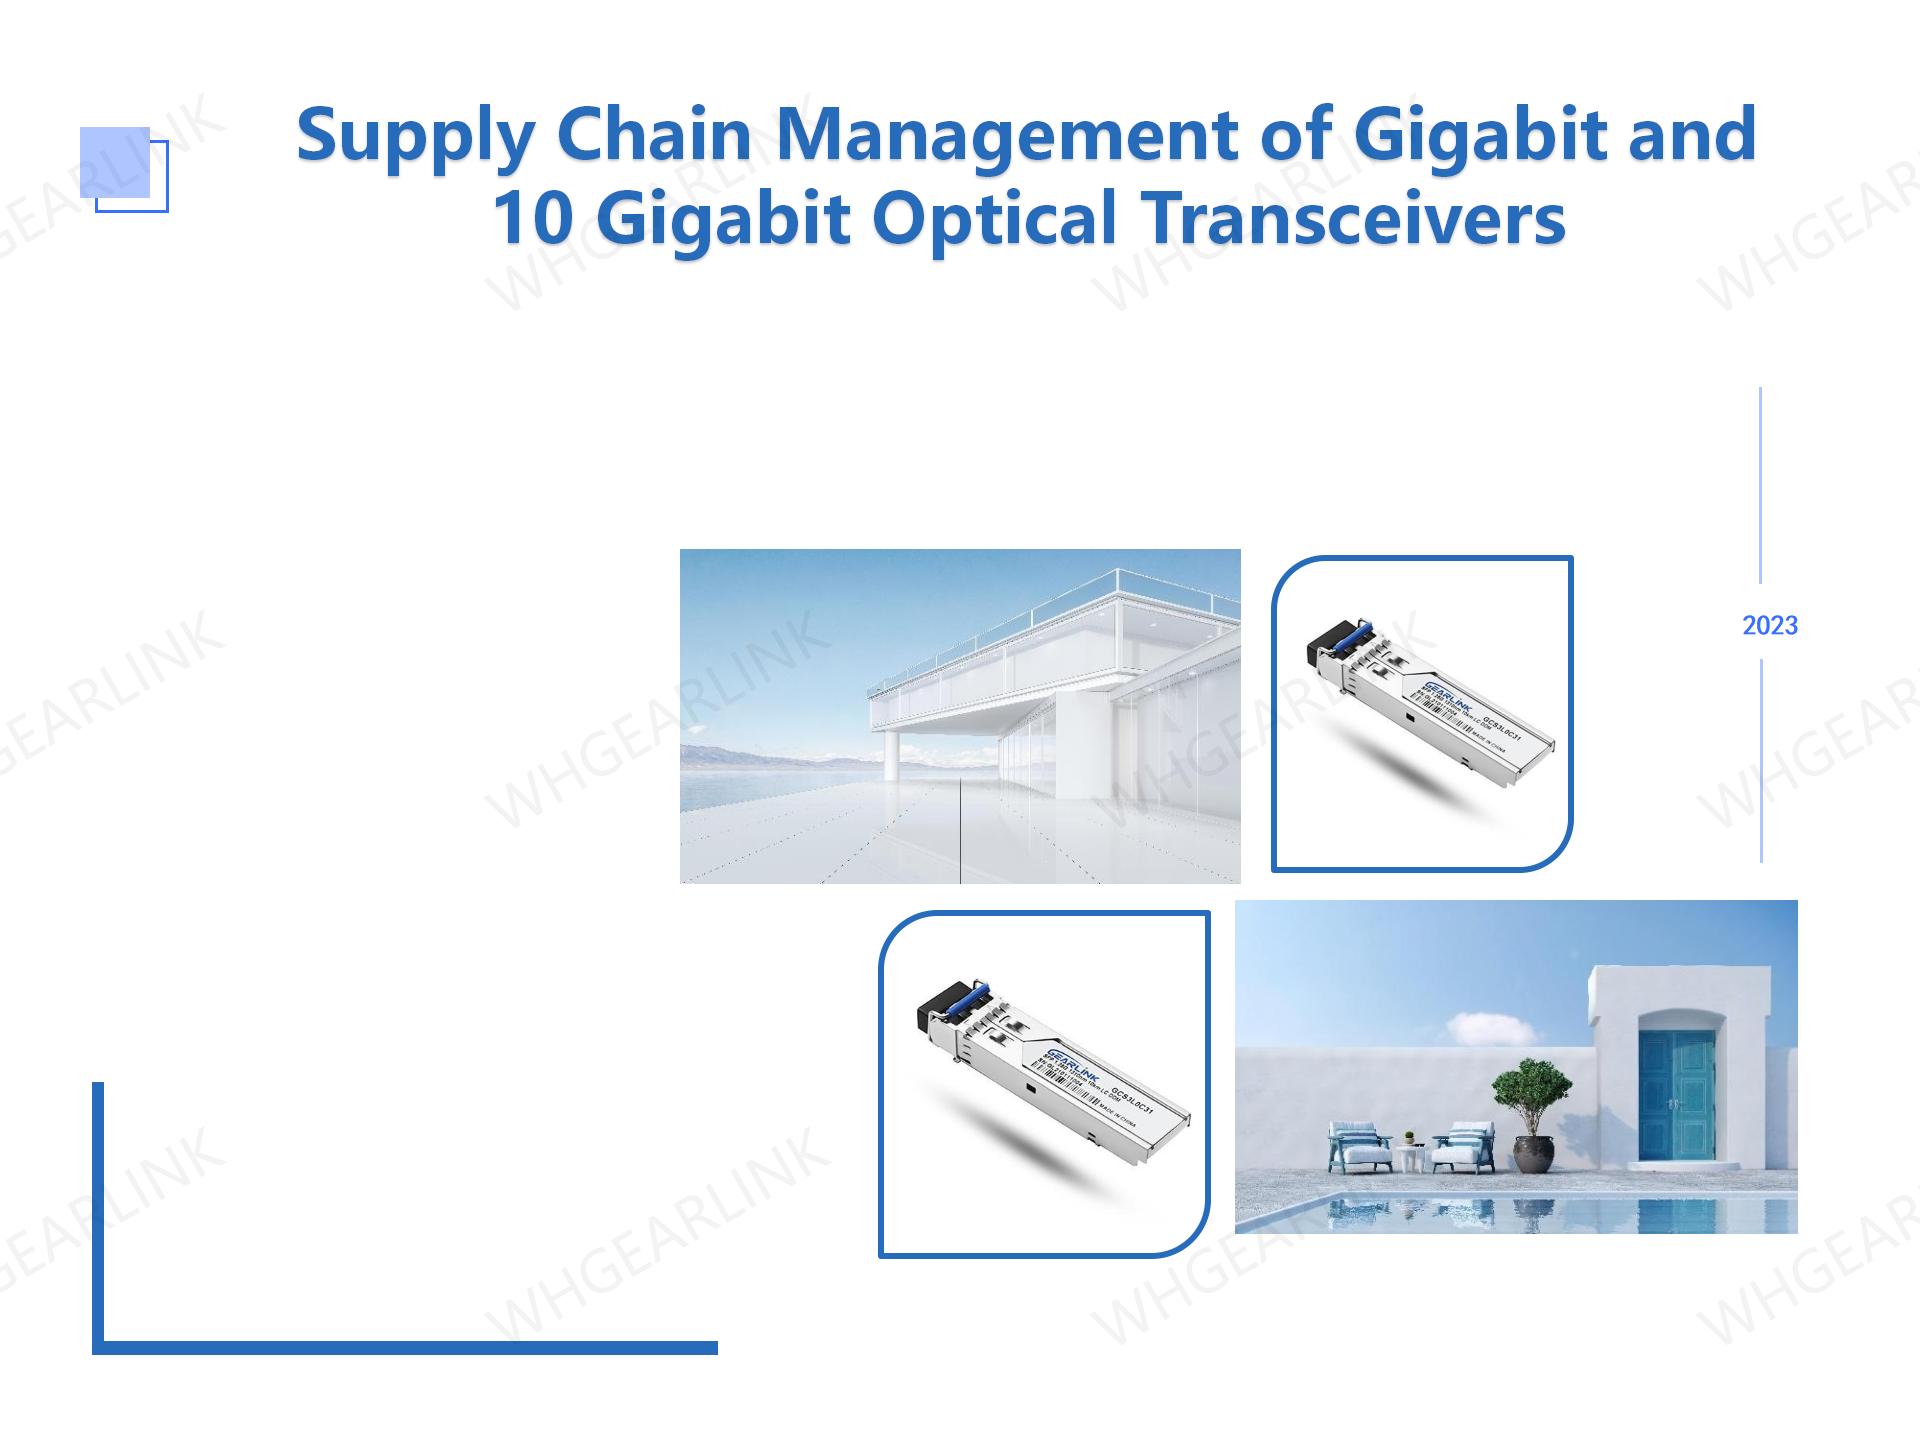 Supply Chain Management of Gigabit and 10 Gigabit Optical Transceivers